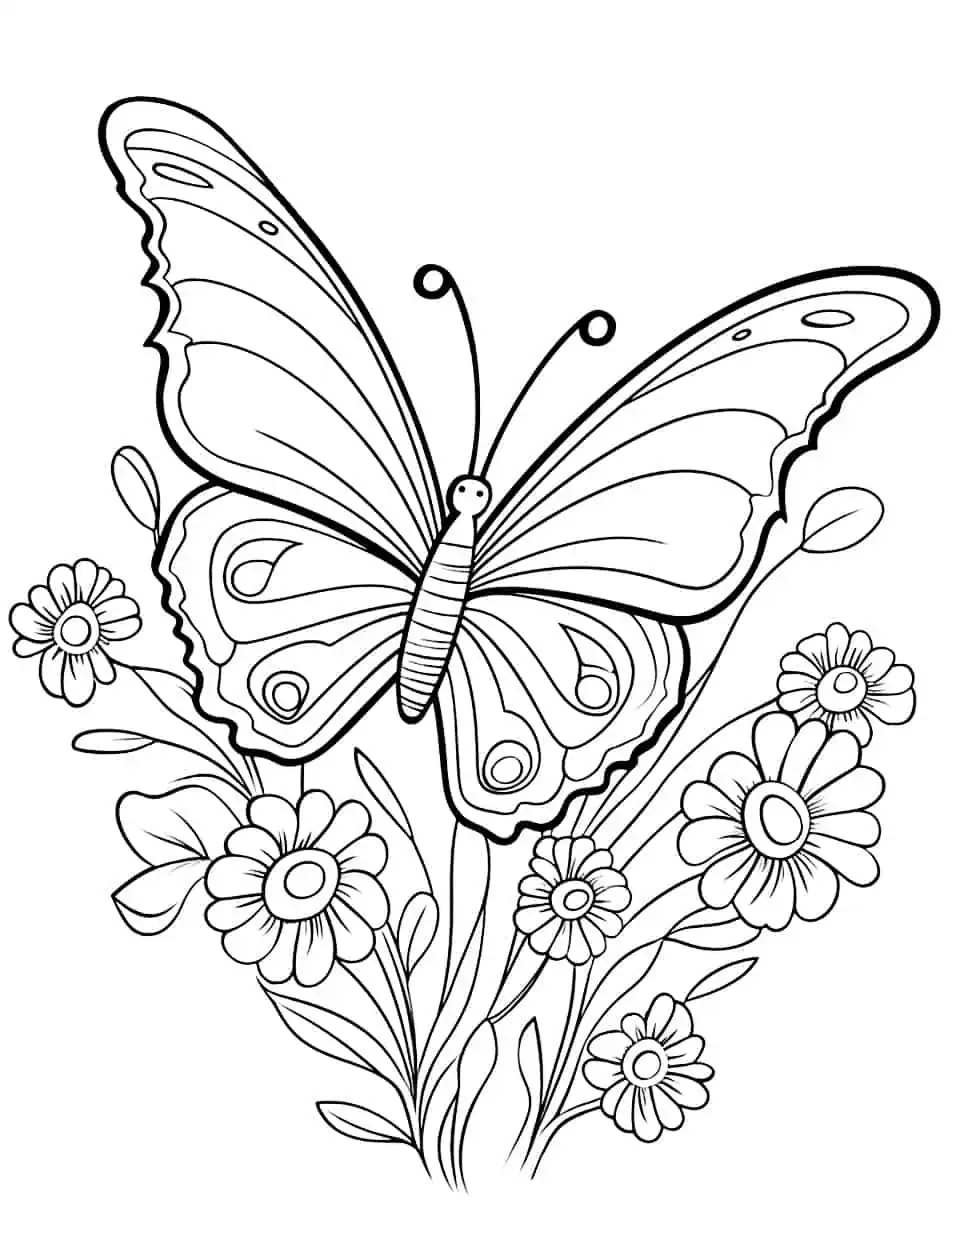 Butterfly Bouquet Coloring Page - A coloring page showcasing a bouquet of flowers with a butterfly flying above.